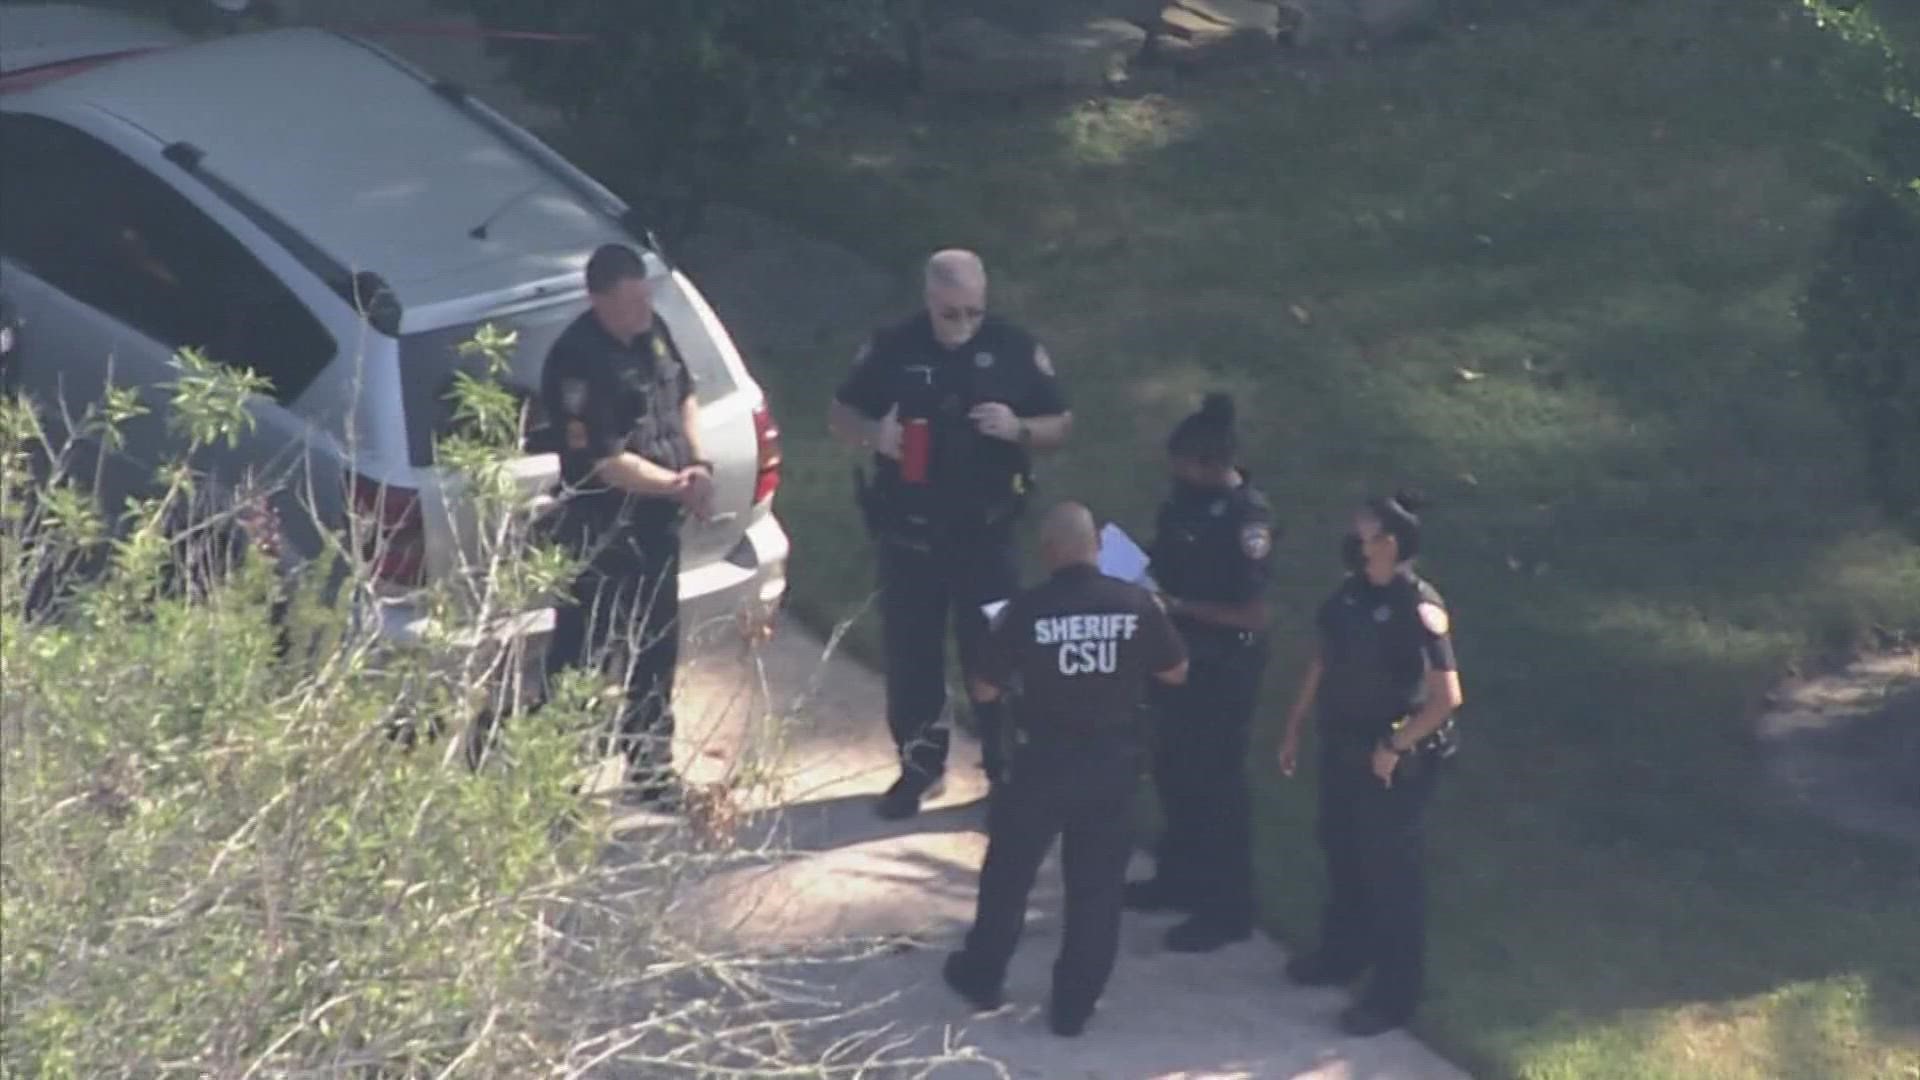 A man is dead after confronting a woman who is believed to be his estranged wife early Monday at her home, according to the Harris County Sheriff's Office.